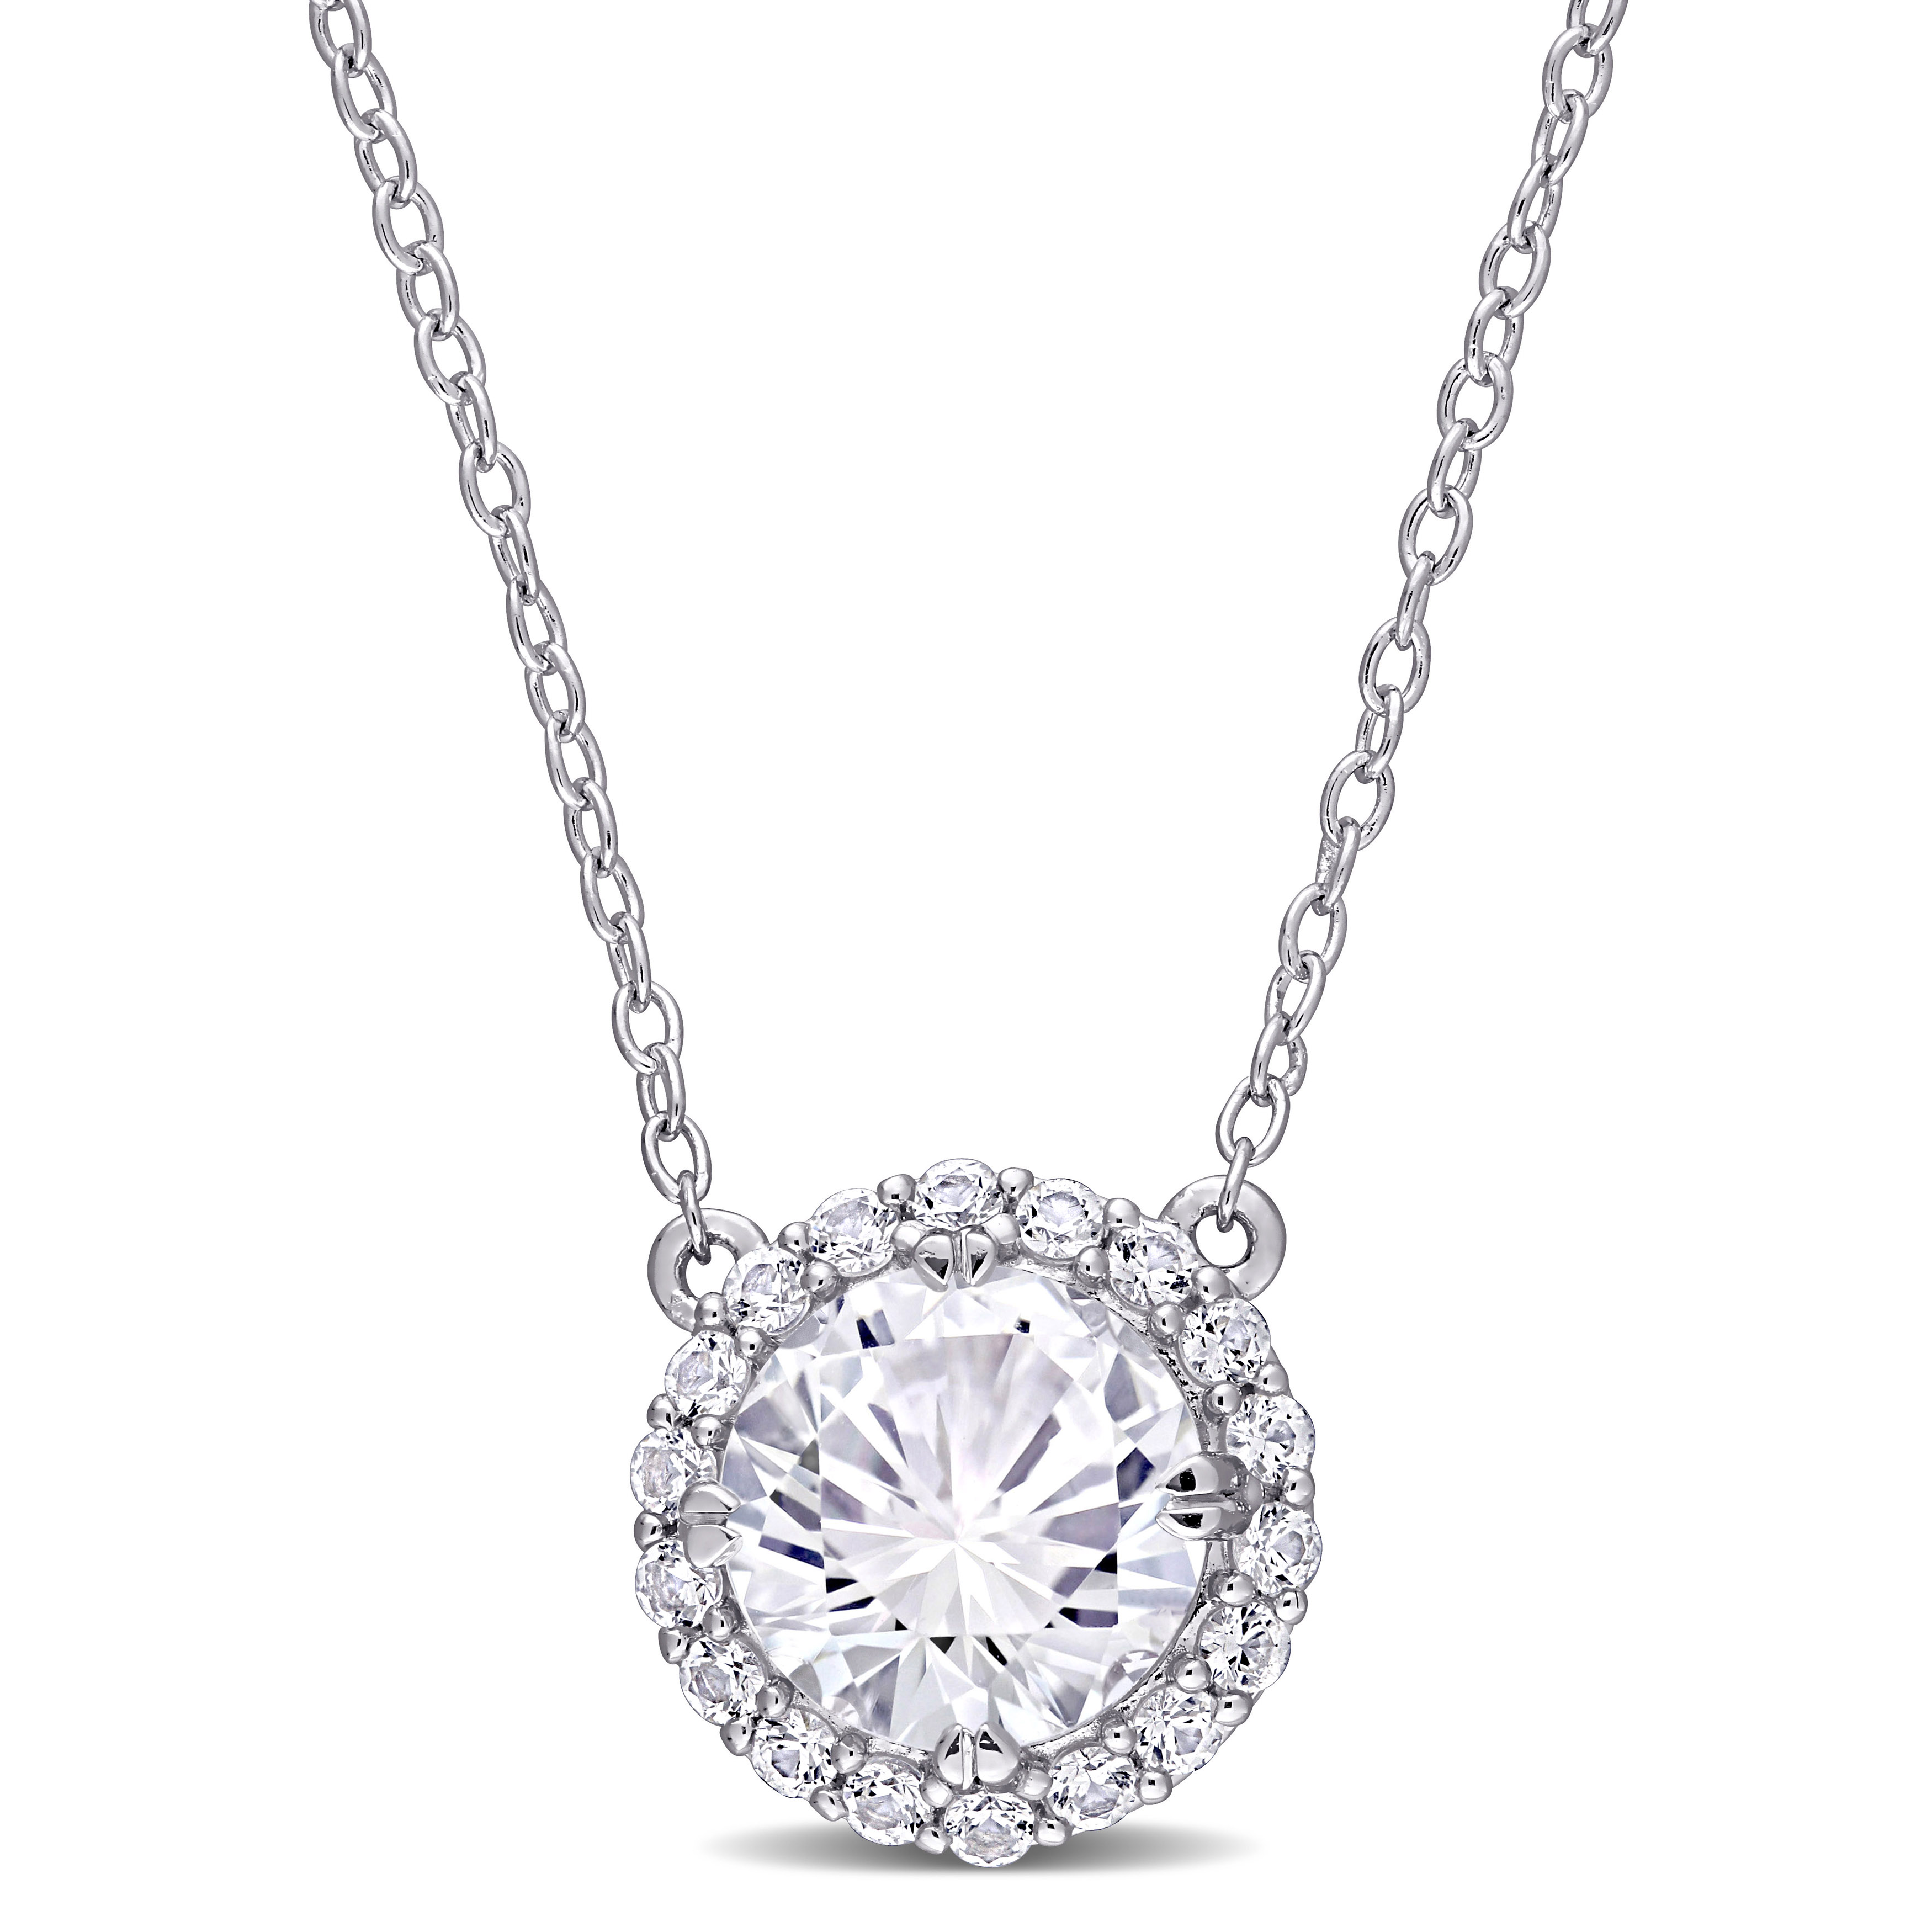 2 3/4 CT TGW Created White Sapphire Solitaire Halo Drop Pendant with Chain in Sterling Silver